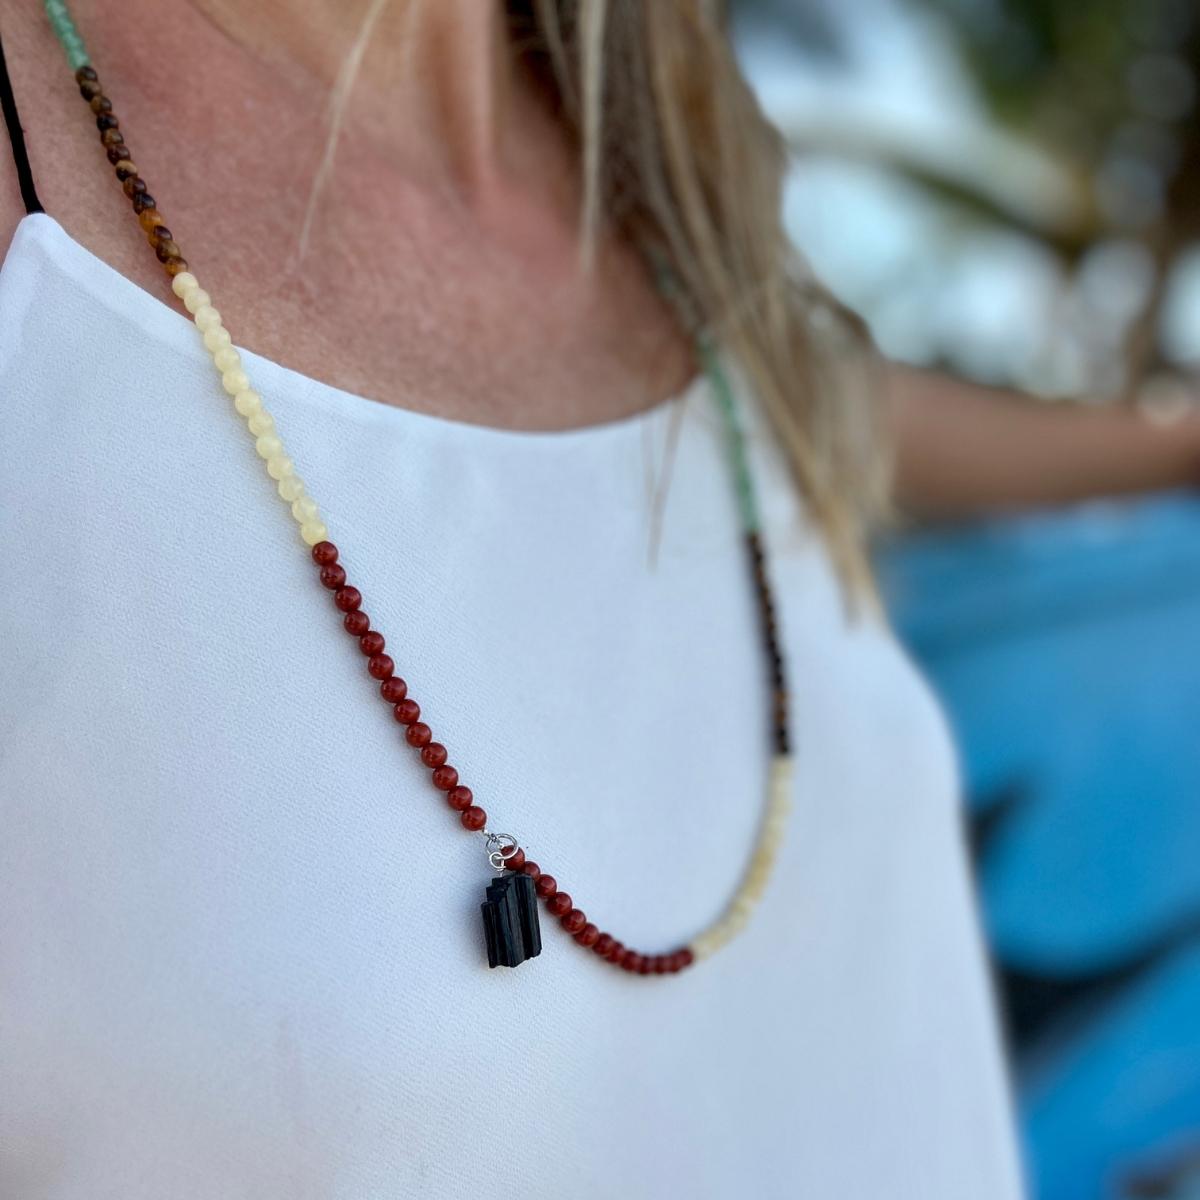 Get the Flowing Energy Chakra Necklace with healing gemstones and feel the balance and harmony of your chakras. 